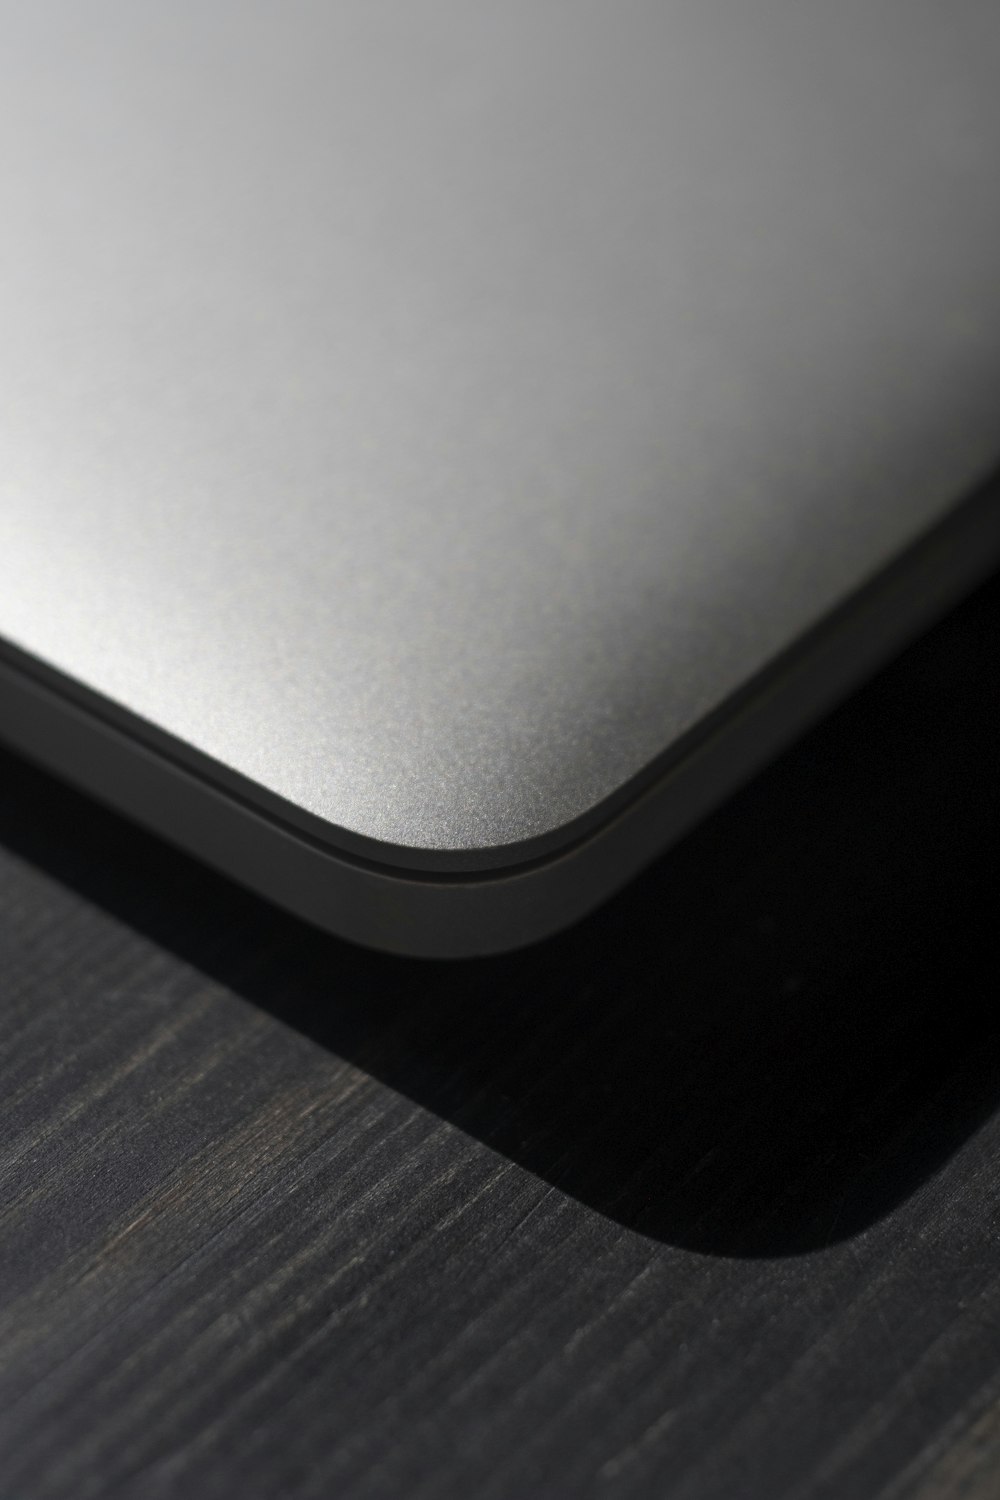 a close up view of the back end of a laptop